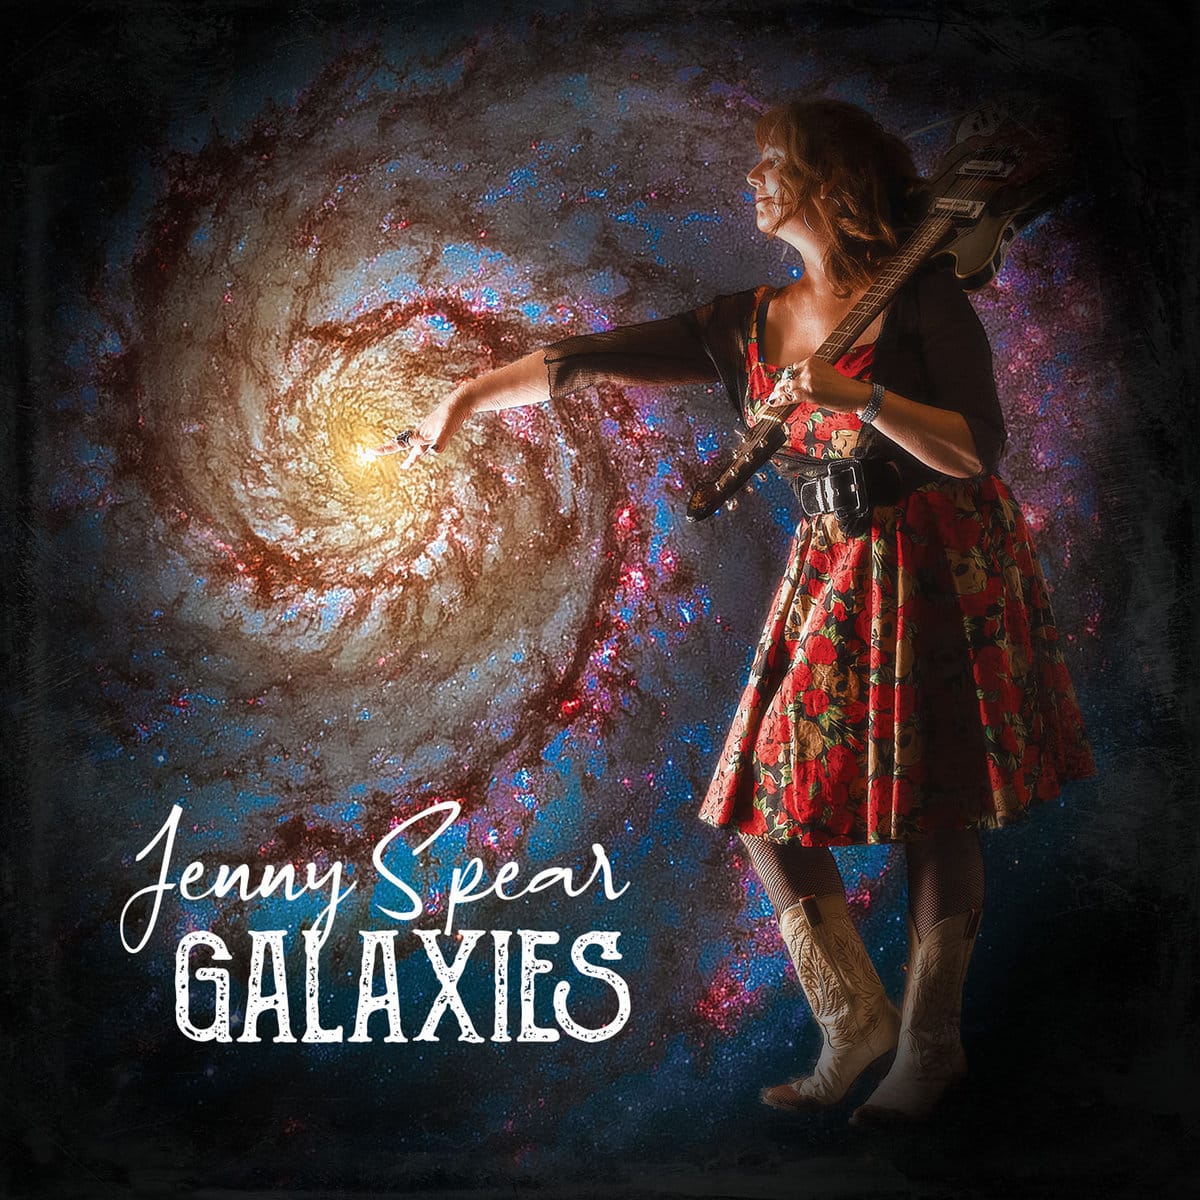 Cover art for Galaxies by Jenny Spear. Guitars, Drum & Bass Tracking. Mixing: Infidel Studios